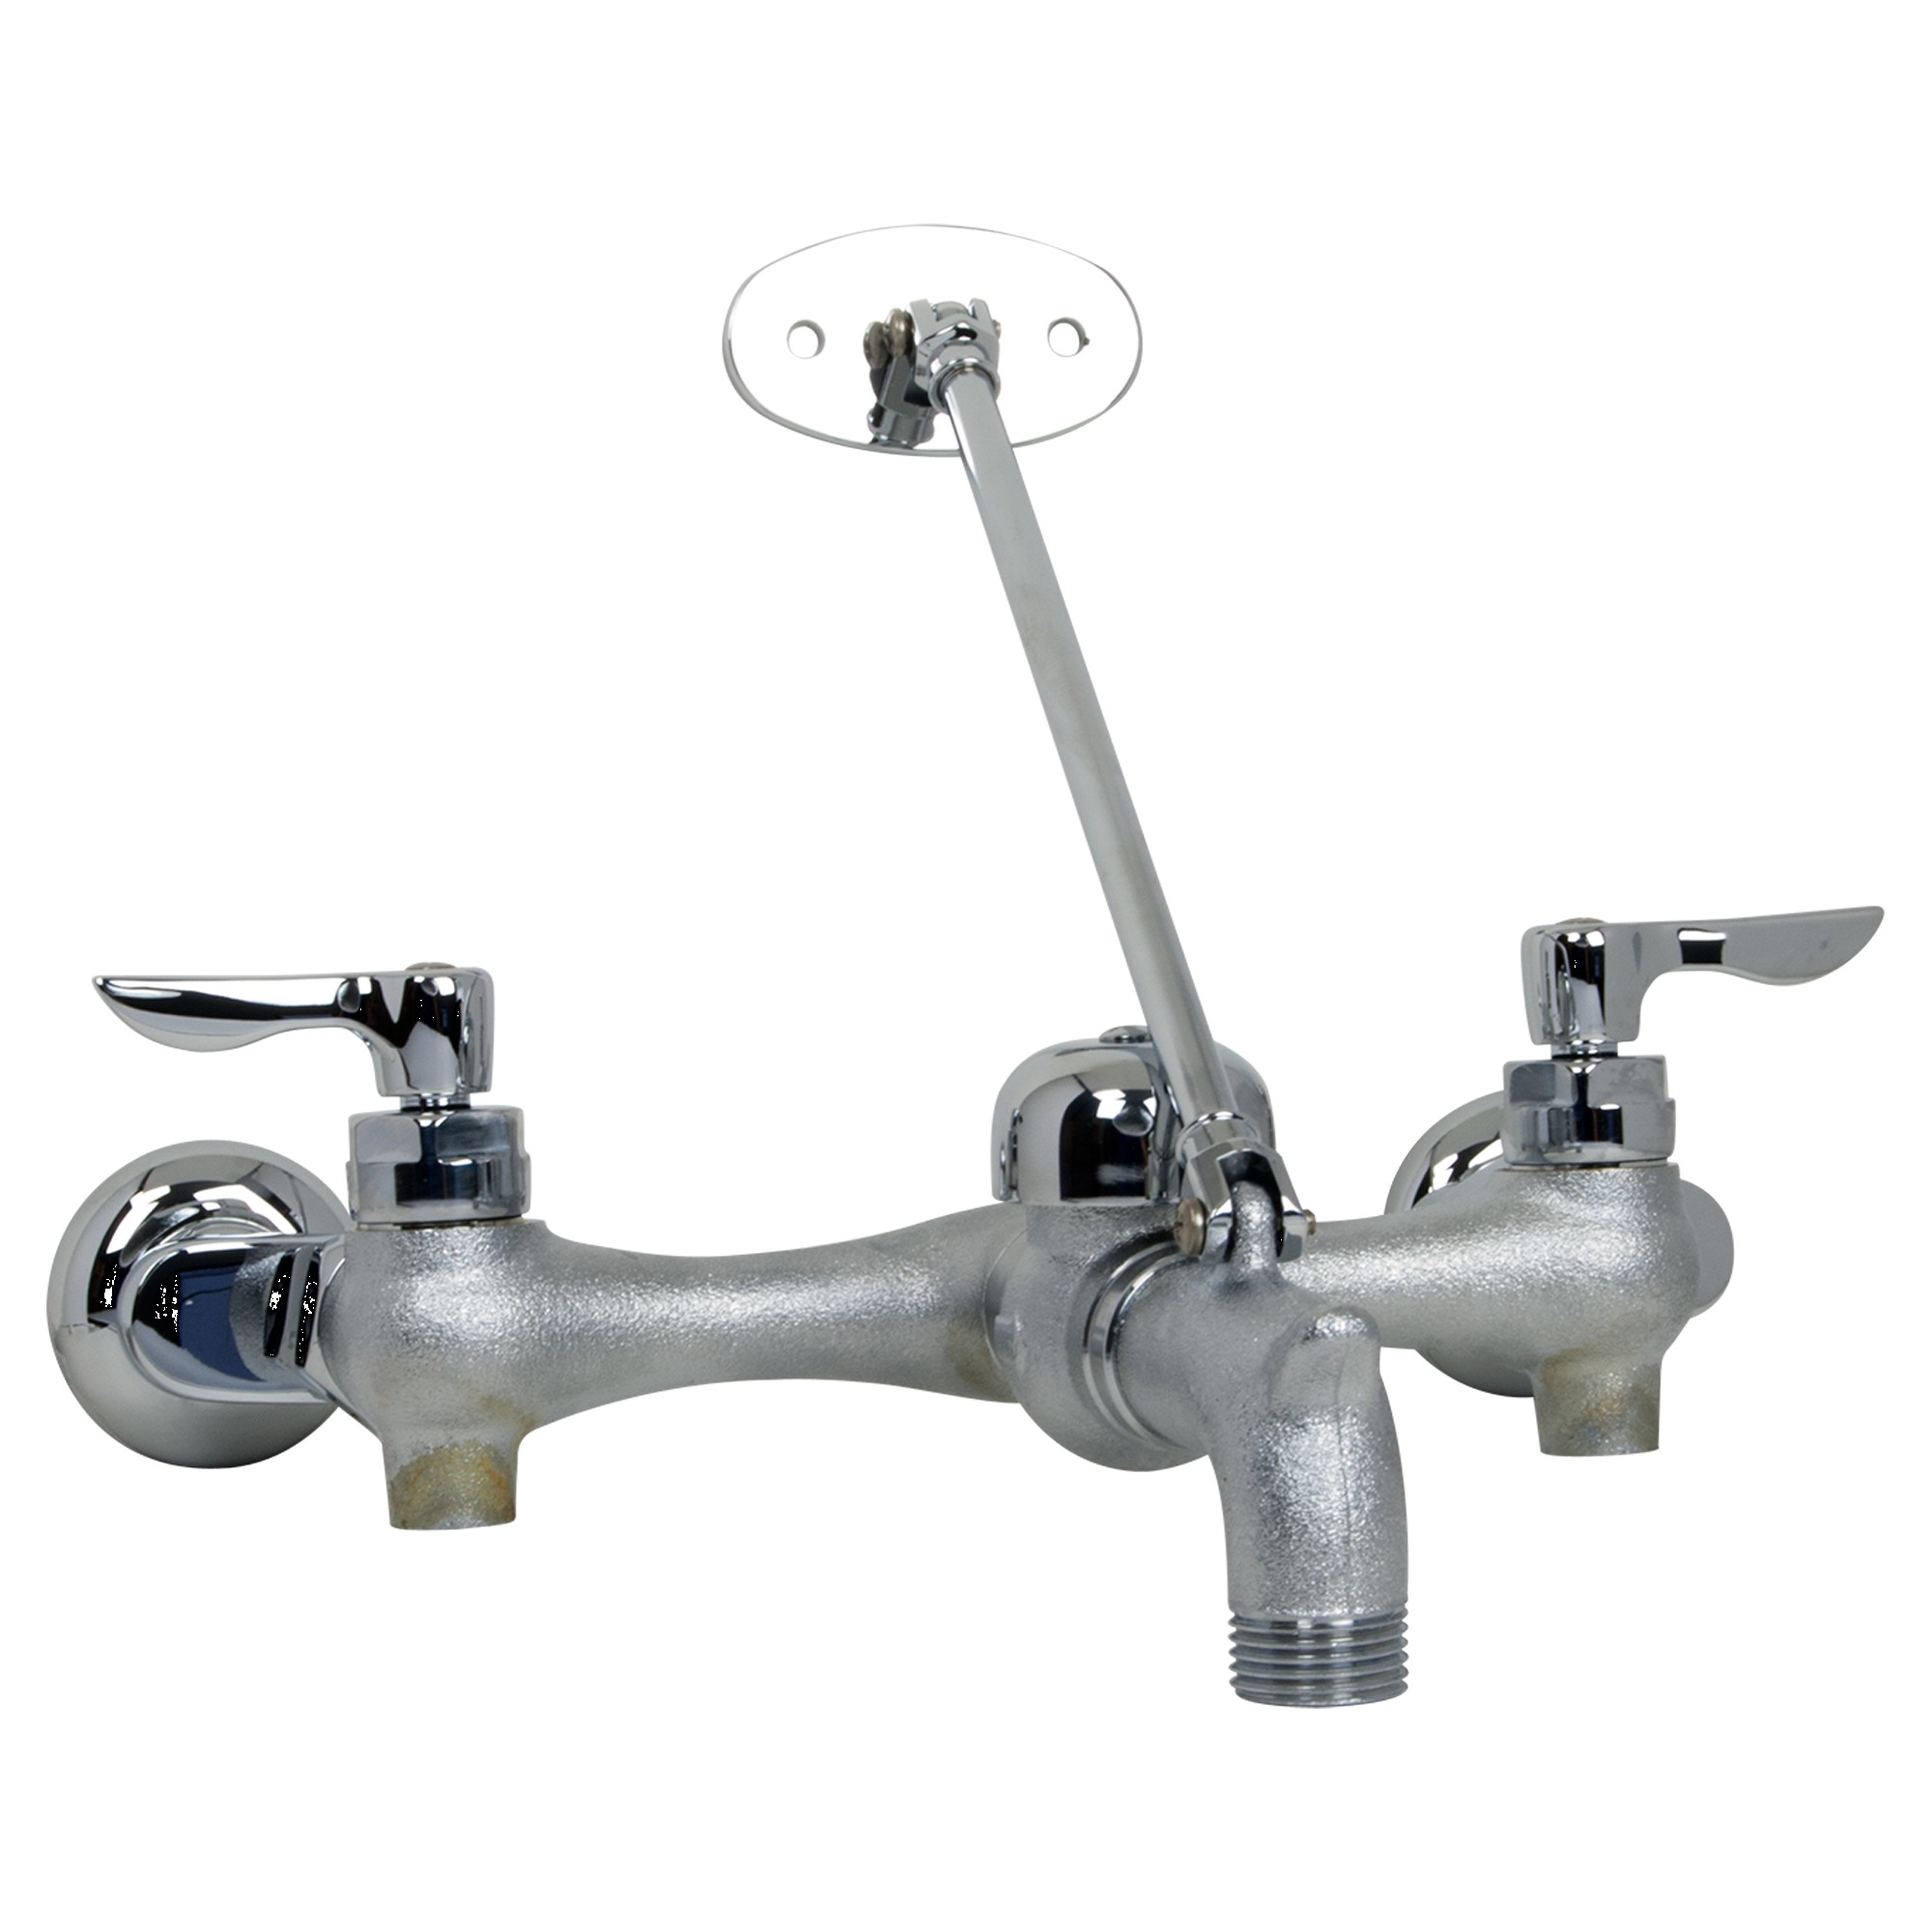 American Standard | 8354.112.004 | AMERICAN STANDARD 8354.112 SERVICE SINK FAUCET WITH 6" VACUUM BREAKER SPOUT RC 004 ROUGH CHROME